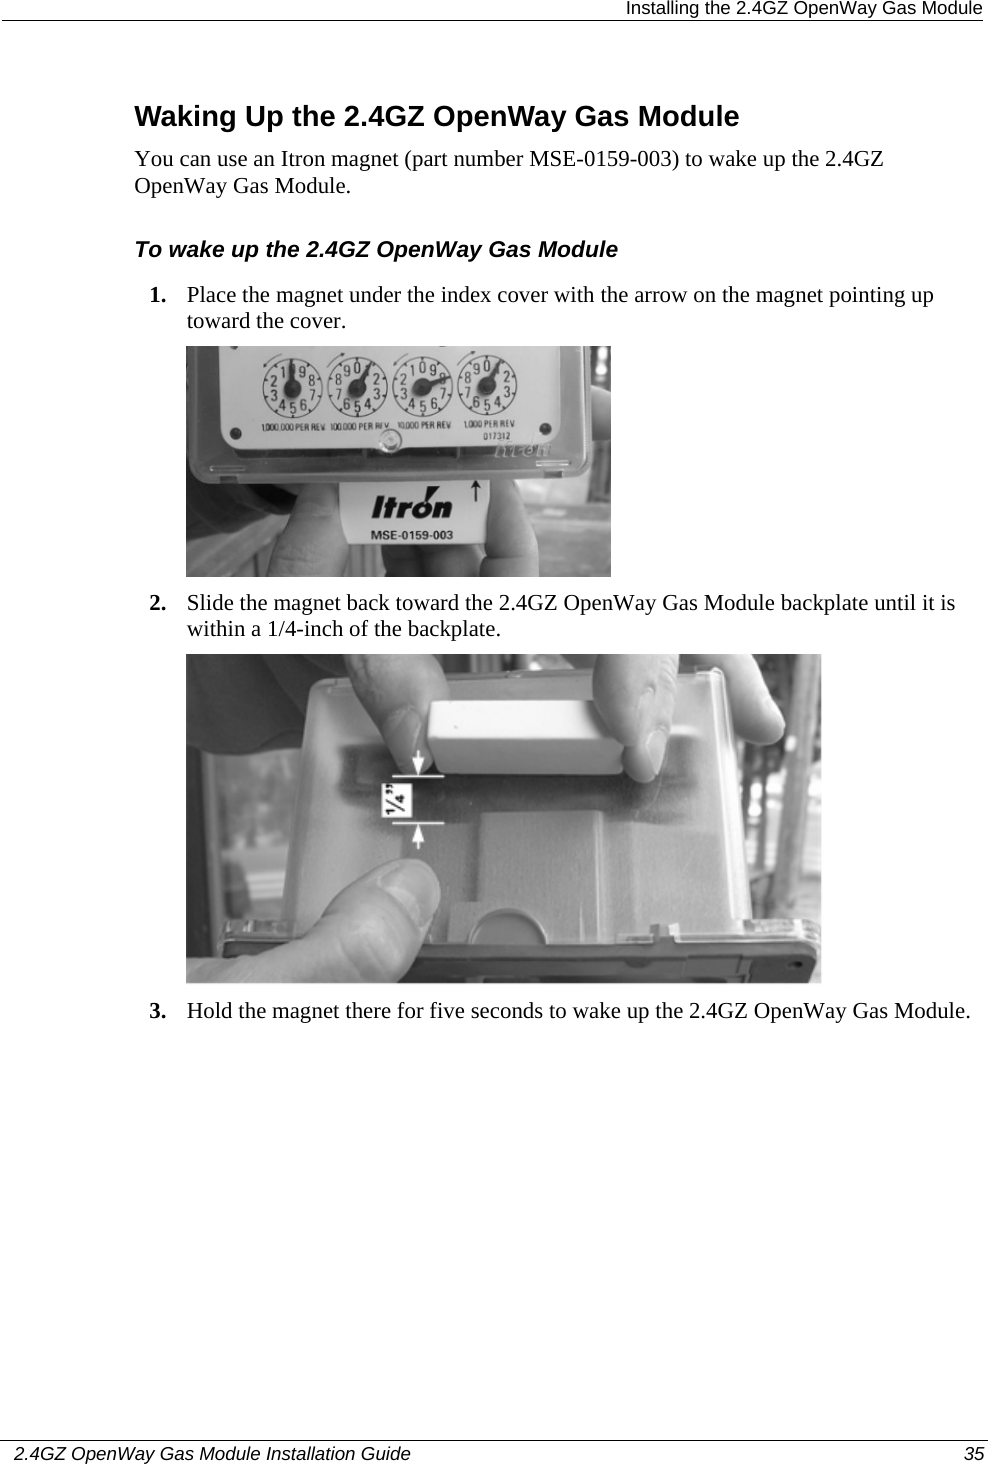  Installing the 2.4GZ OpenWay Gas Module   2.4GZ OpenWay Gas Module Installation Guide  35  Waking Up the 2.4GZ OpenWay Gas Module You can use an Itron magnet (part number MSE-0159-003) to wake up the 2.4GZ OpenWay Gas Module. To wake up the 2.4GZ OpenWay Gas Module 1. Place the magnet under the index cover with the arrow on the magnet pointing up toward the cover.  2. Slide the magnet back toward the 2.4GZ OpenWay Gas Module backplate until it is within a 1/4-inch of the backplate.  3. Hold the magnet there for five seconds to wake up the 2.4GZ OpenWay Gas Module. 